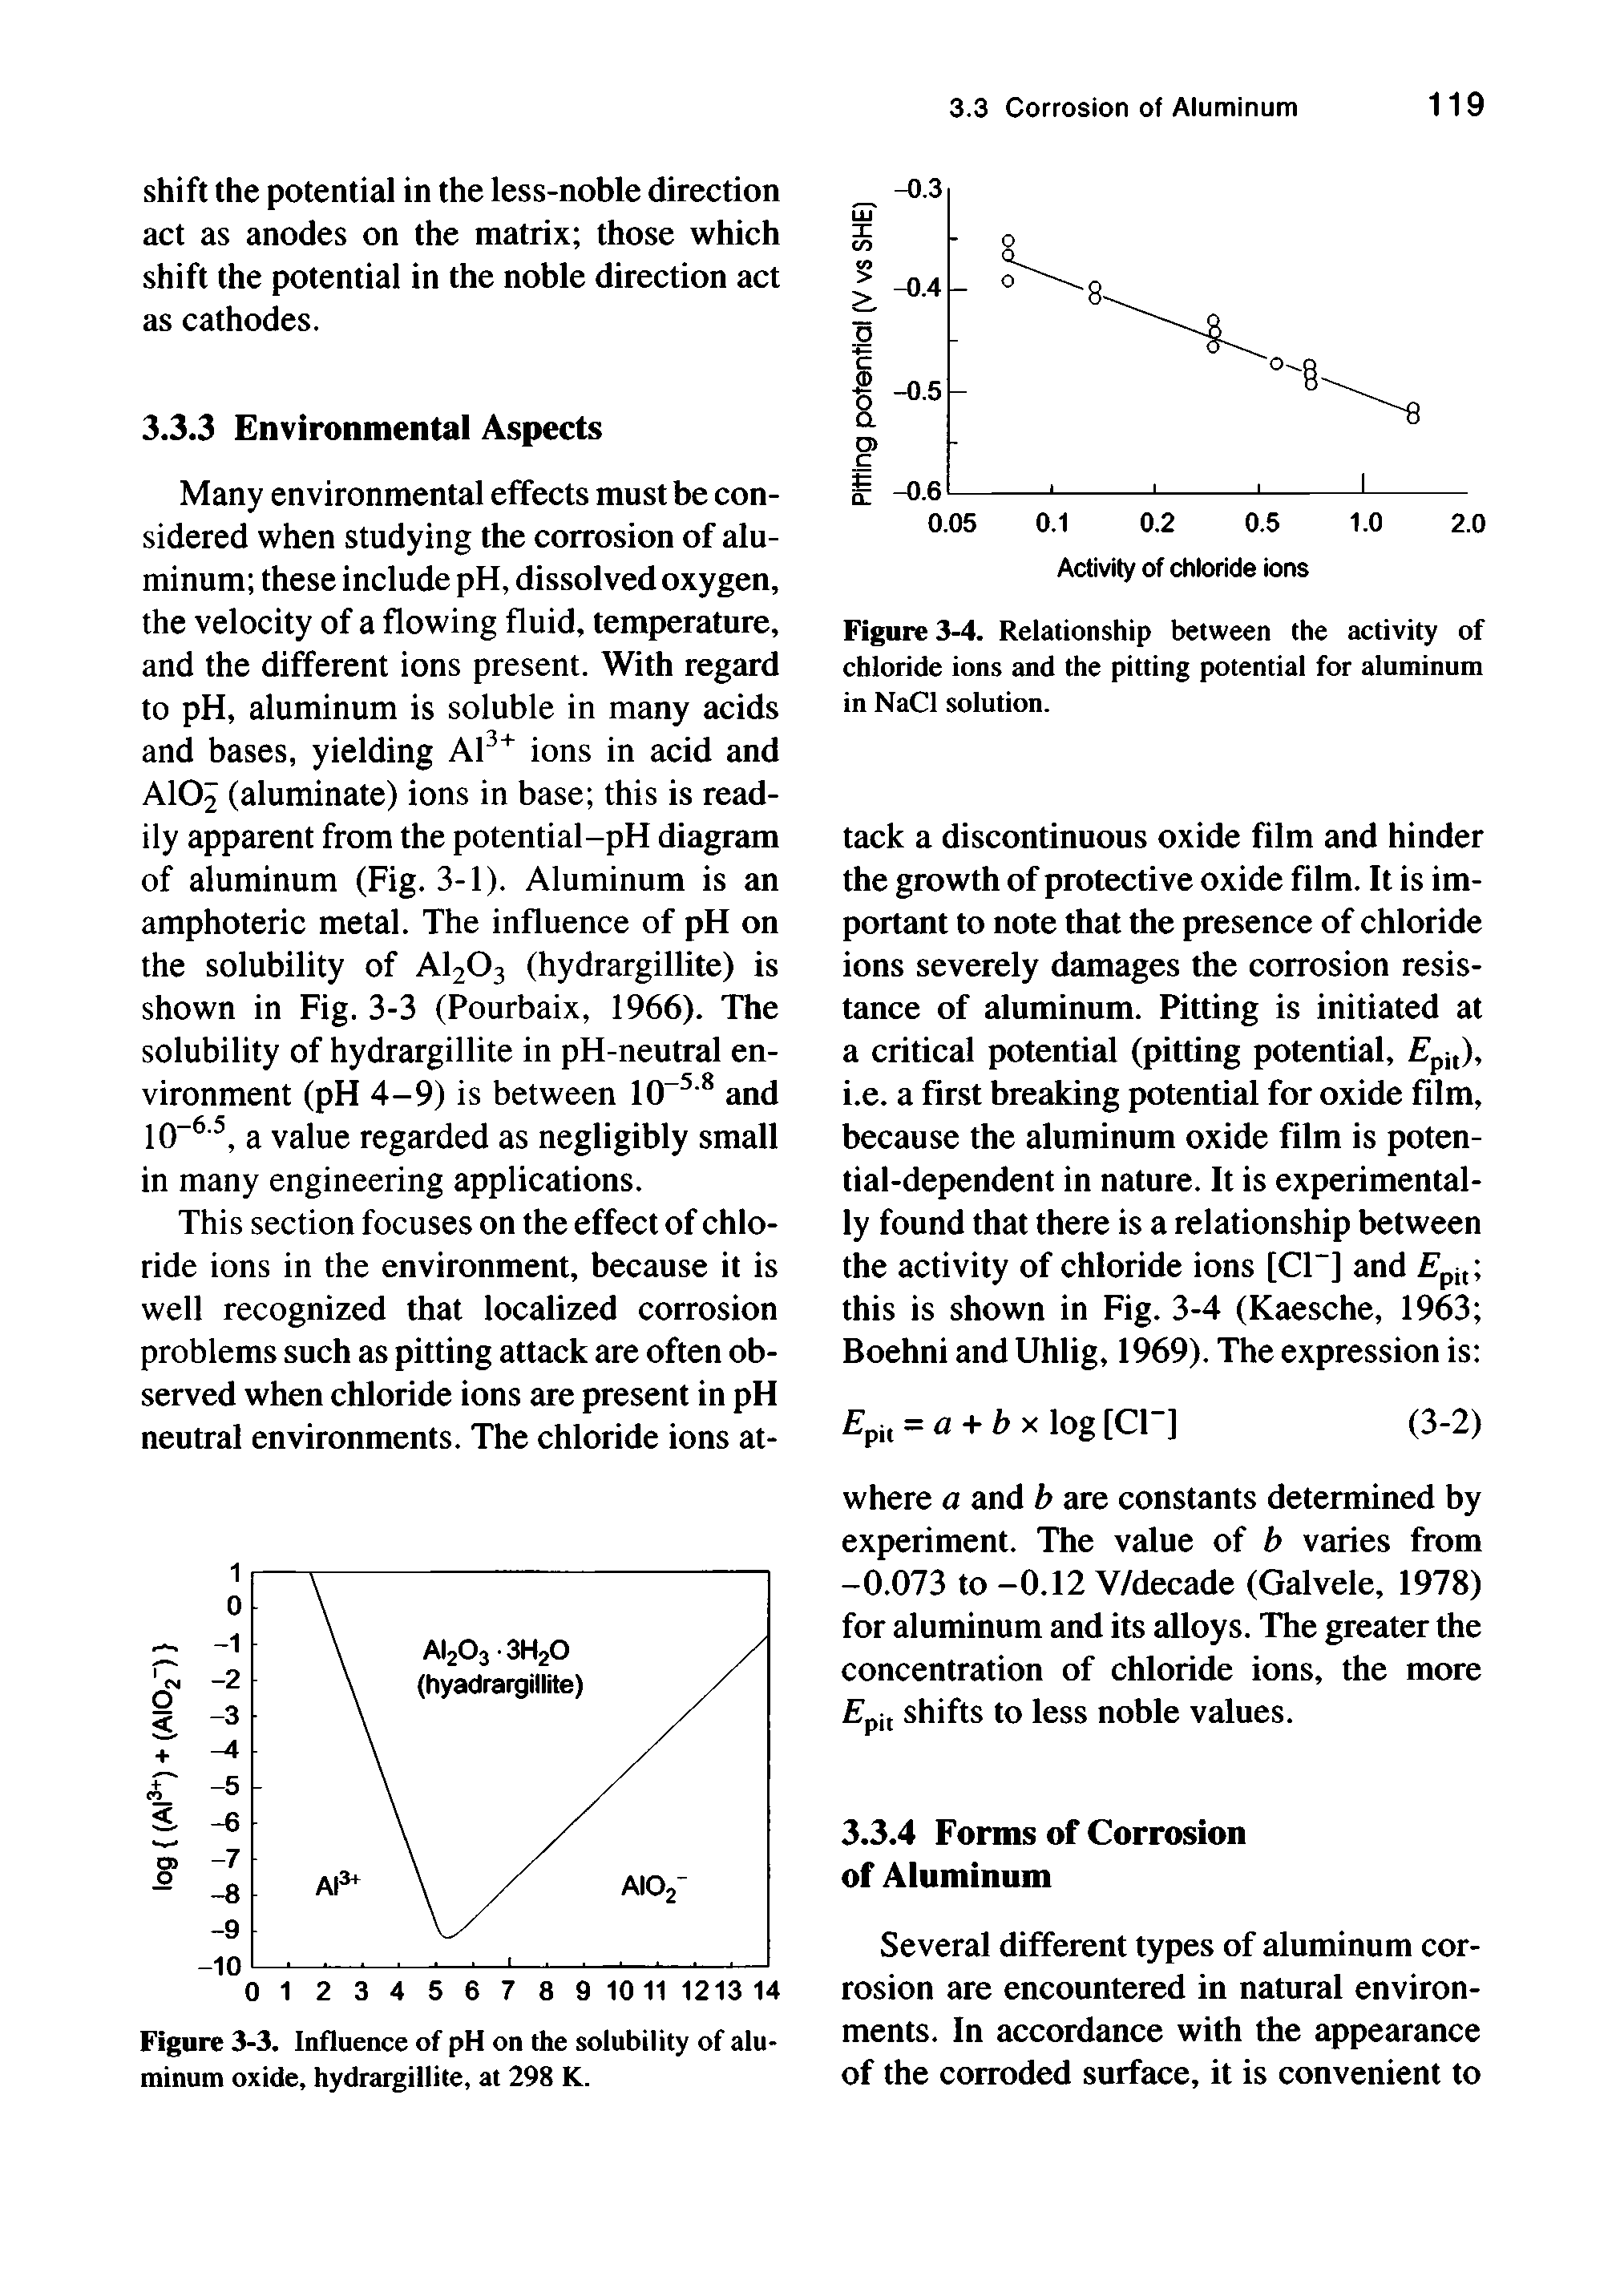 Figure 3-4. Relationship between the activity of chloride ions and the pitting potential for aluminum in NaCl solution.